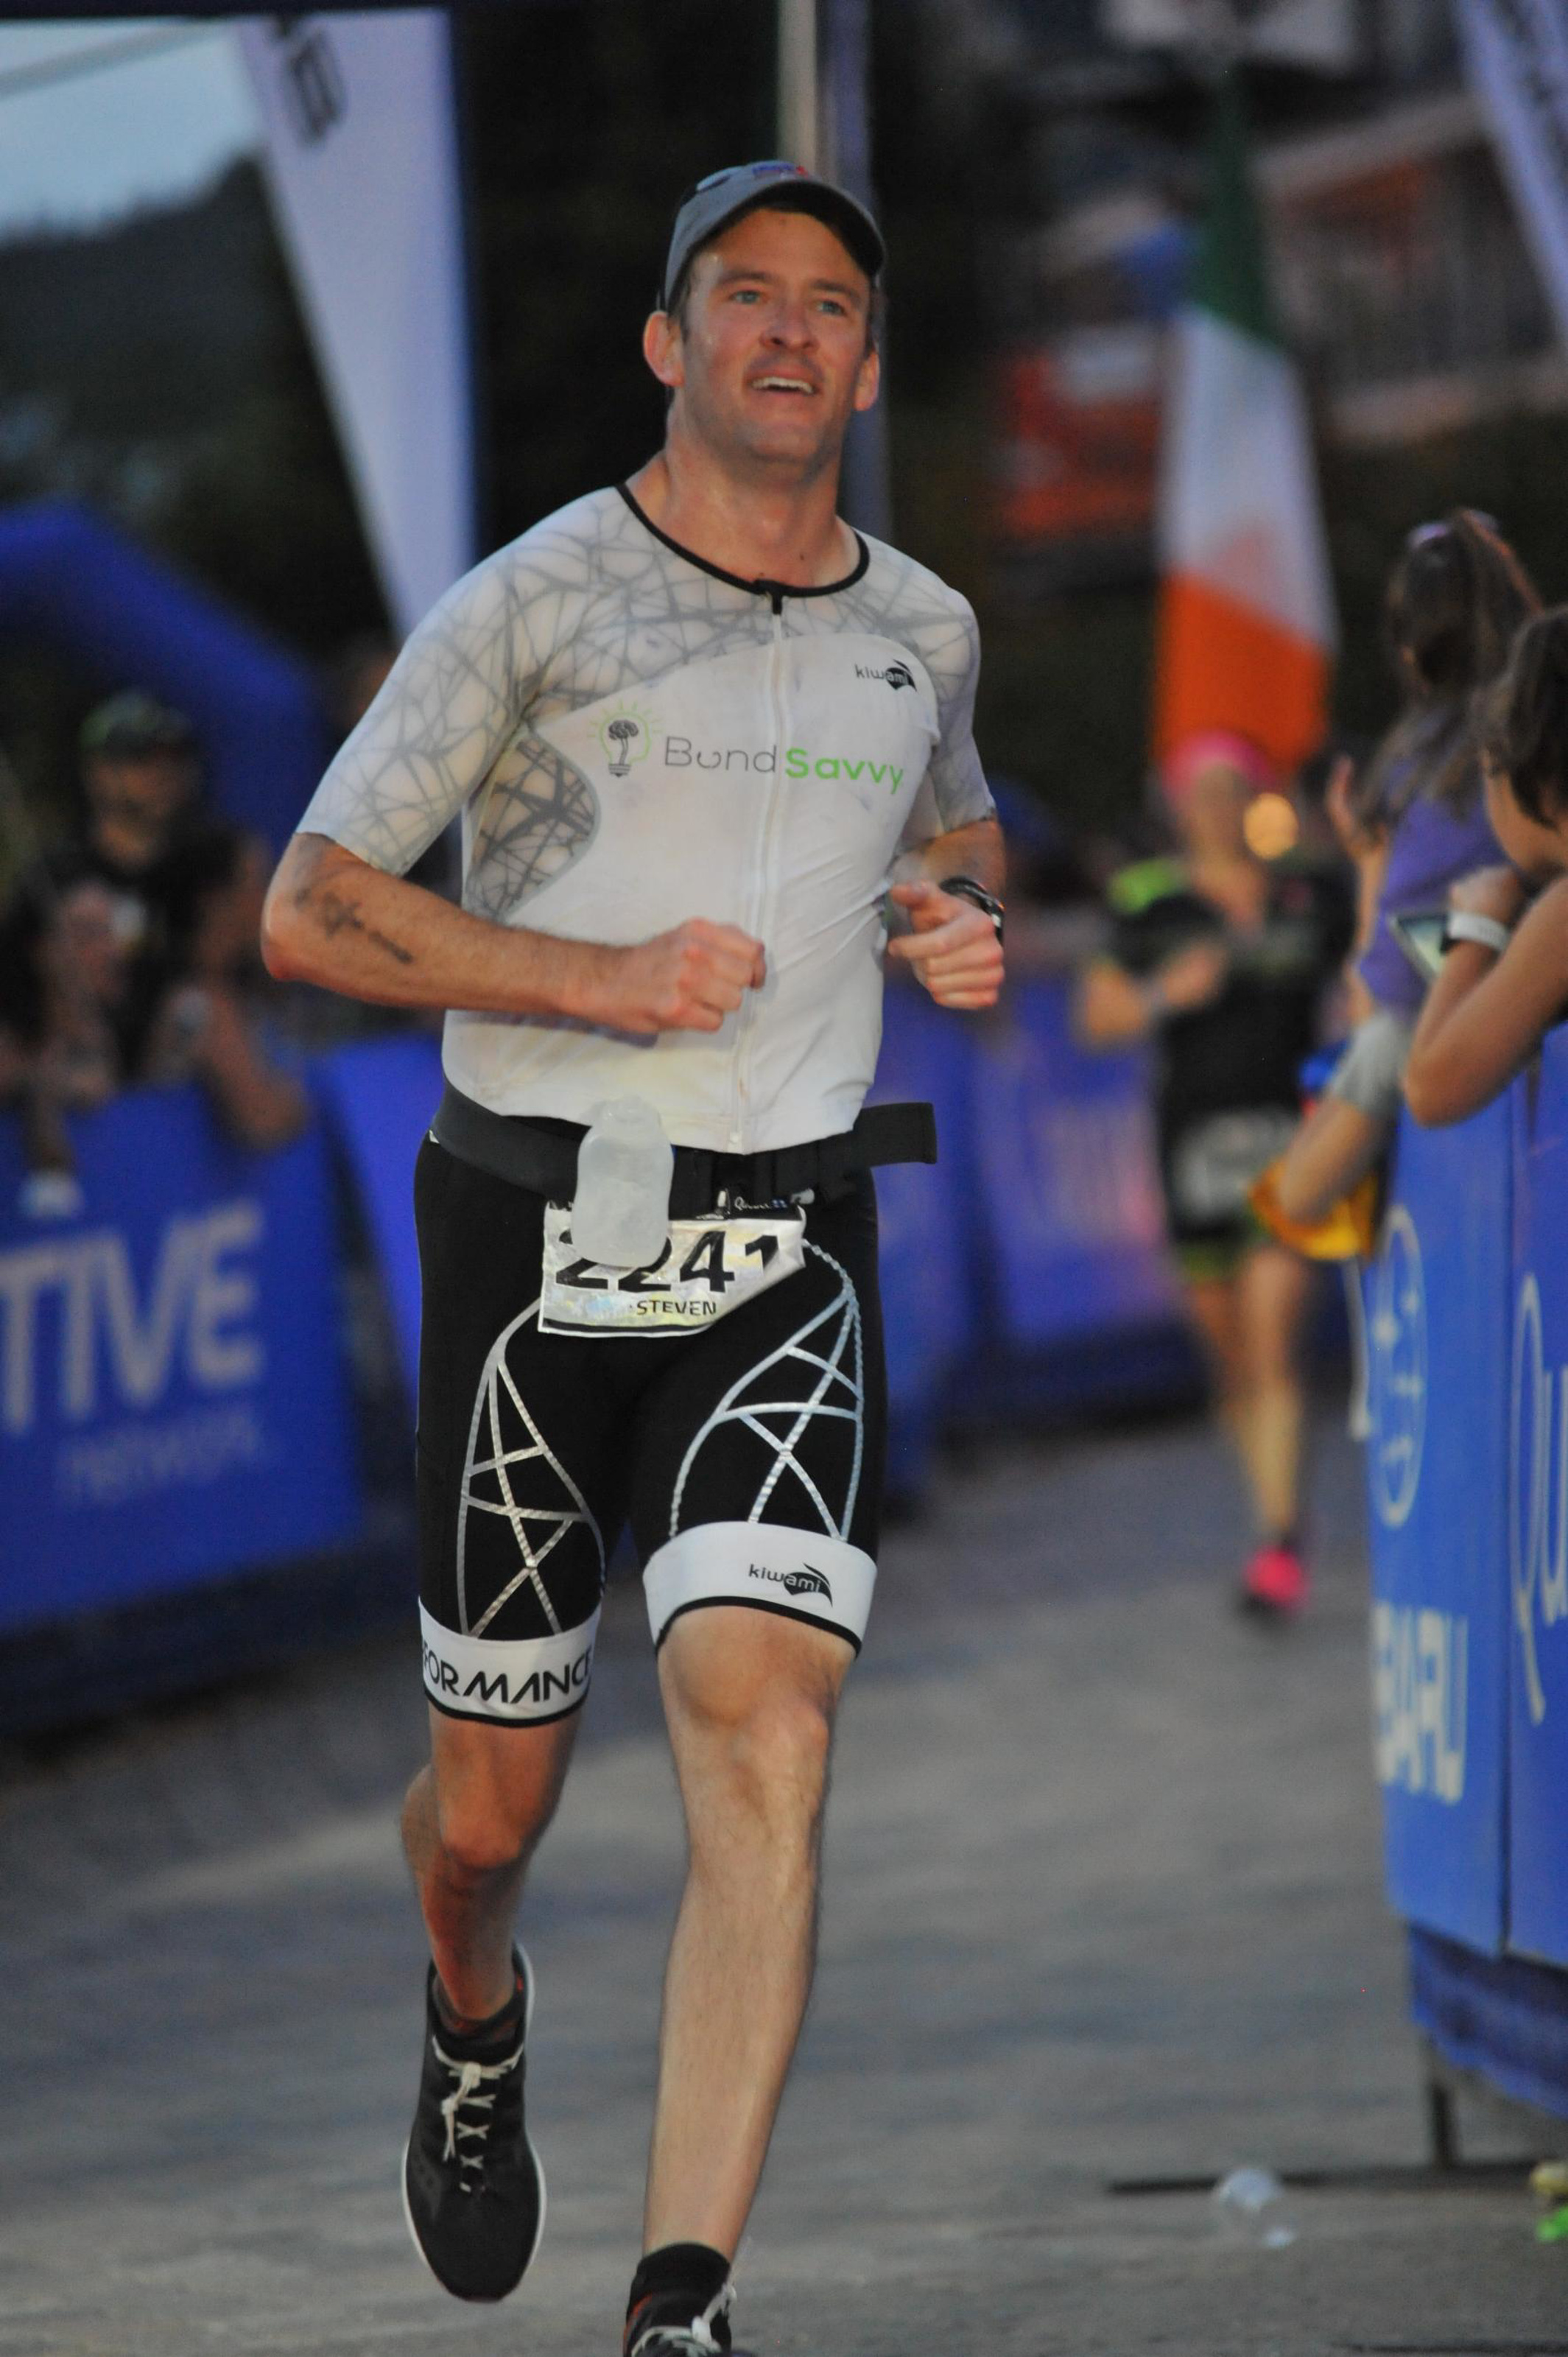 Steve Shaw Completes Ironman Mont-Tremblant